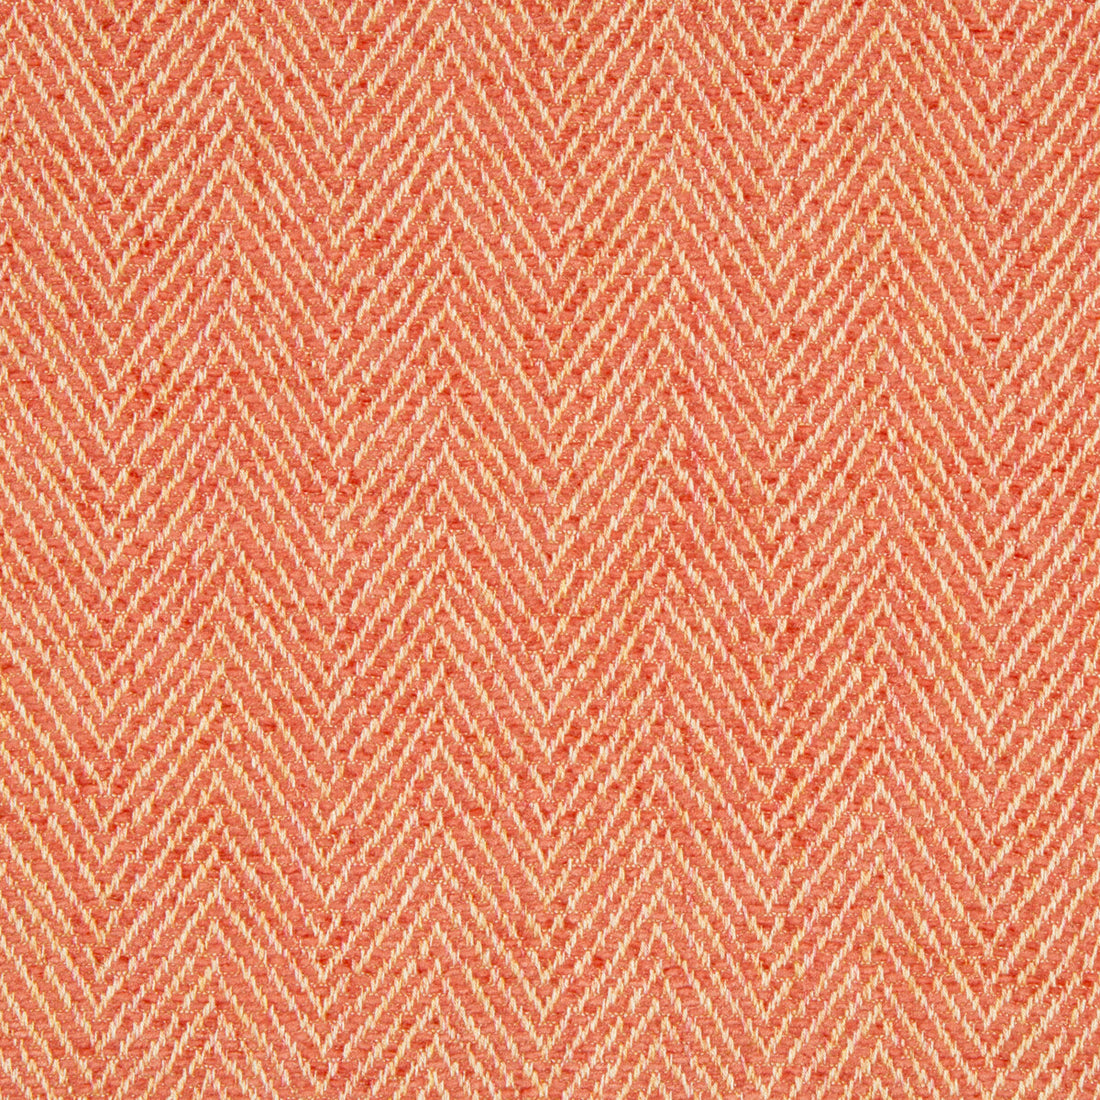 Firle Chenille II fabric in blush color - pattern 8017140.17.0 - by Brunschwig &amp; Fils in the Baronet collection